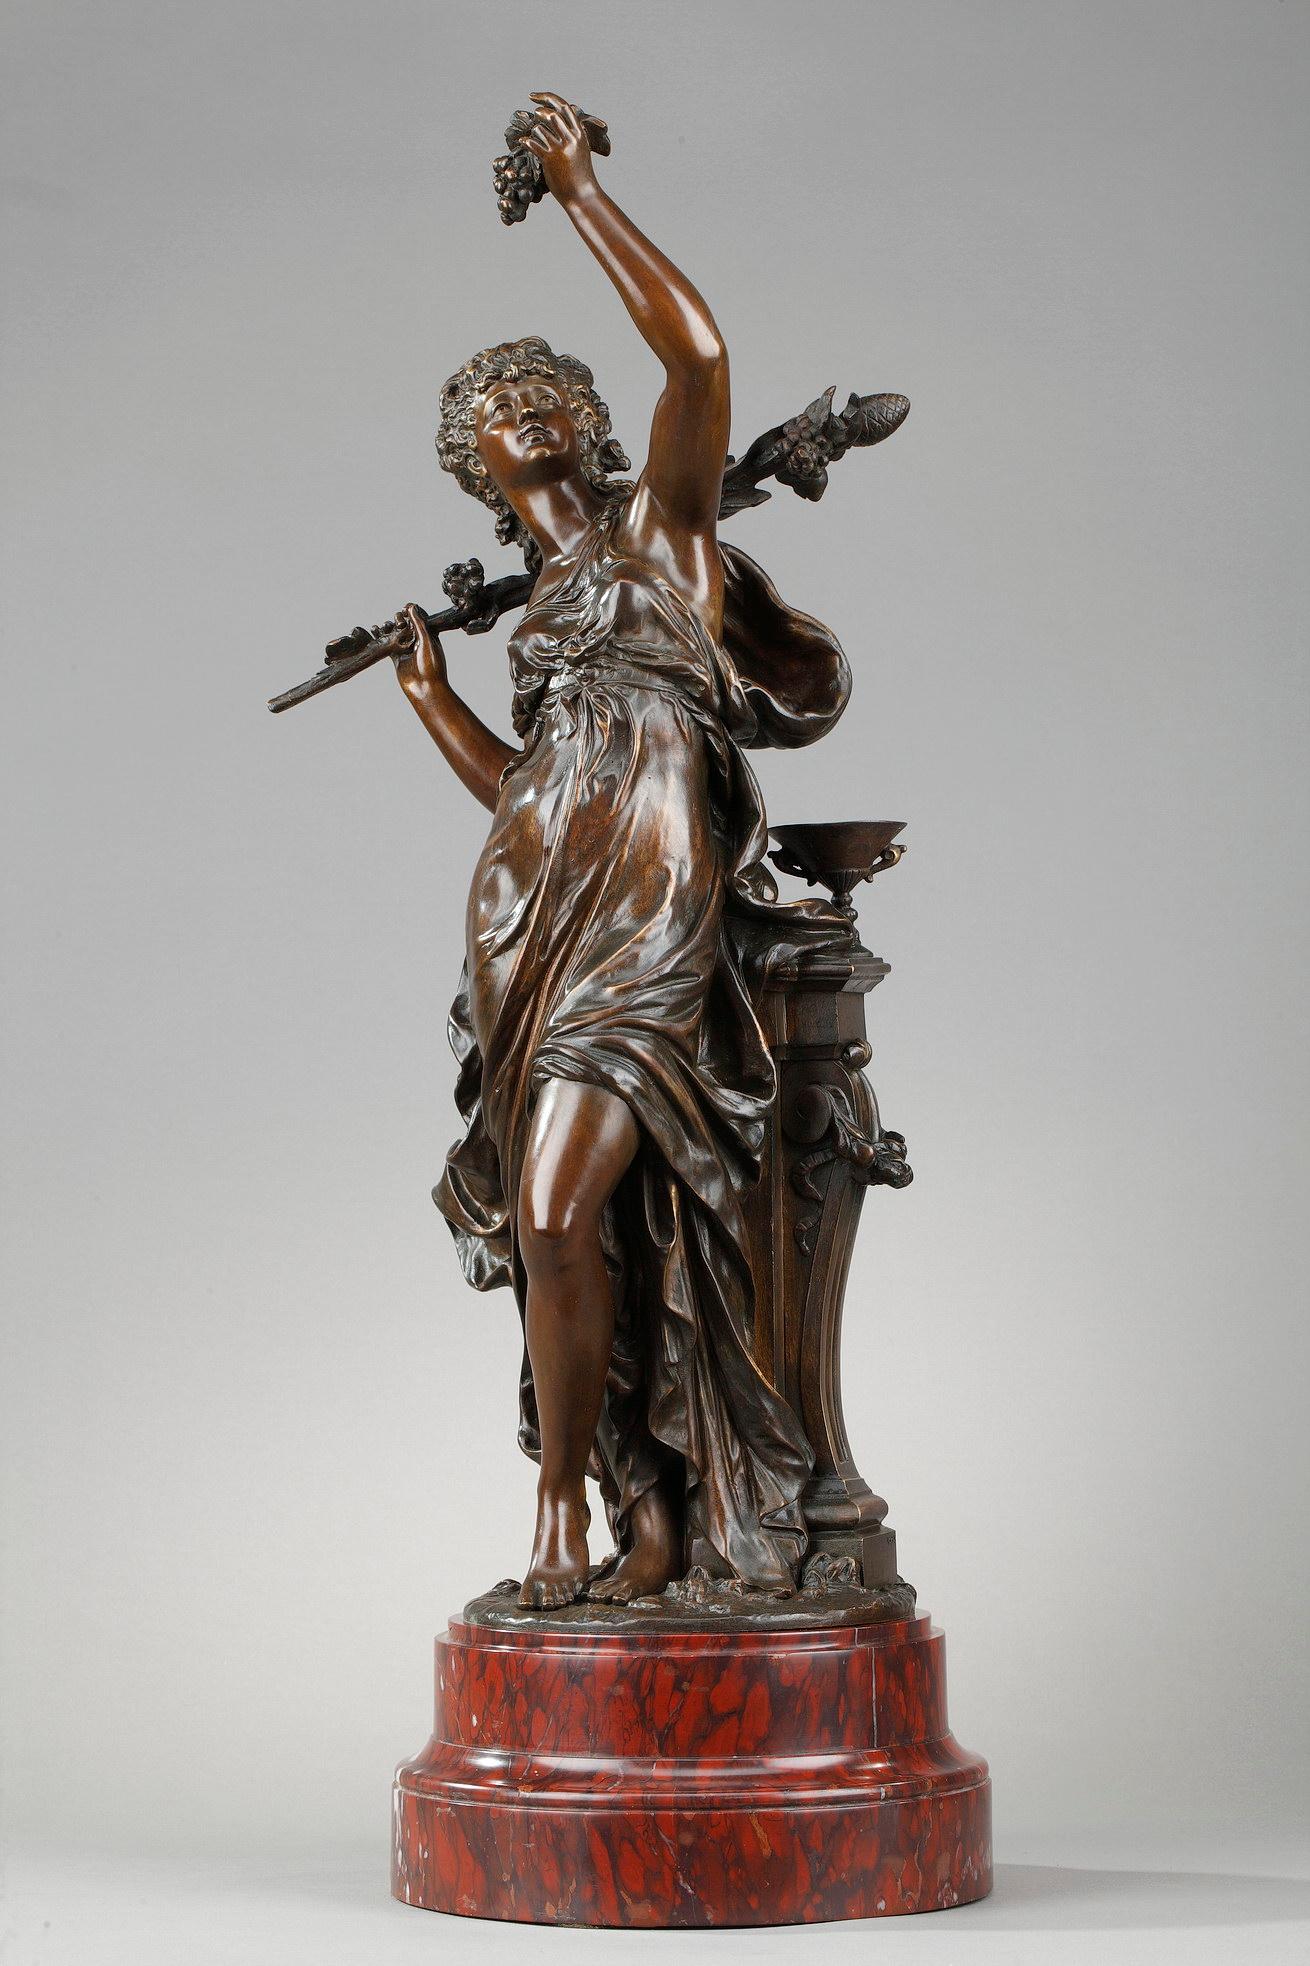 Bronze sculpture with brown patina, the Allegory of the Vine signed Hippolyte Moreau (1832-1927)represents a draped woman with braided hair held back, holding in her raised hand a bunch of grapes and in the other a thyrse placed on her shoulder. The